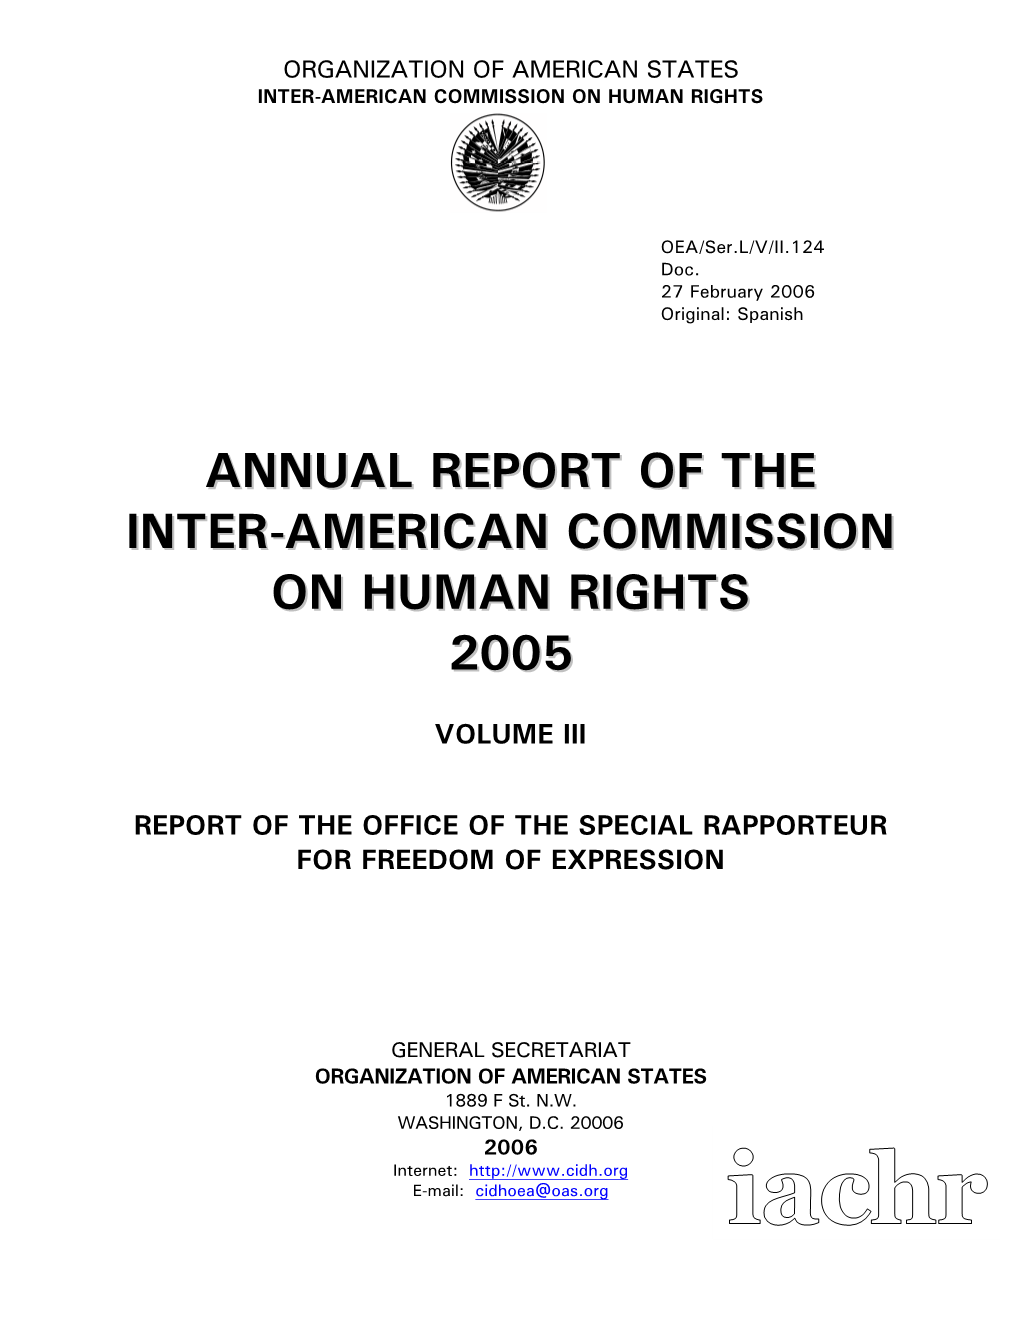 Annual Report of the Inter-American Commission on Human Rights, 2004